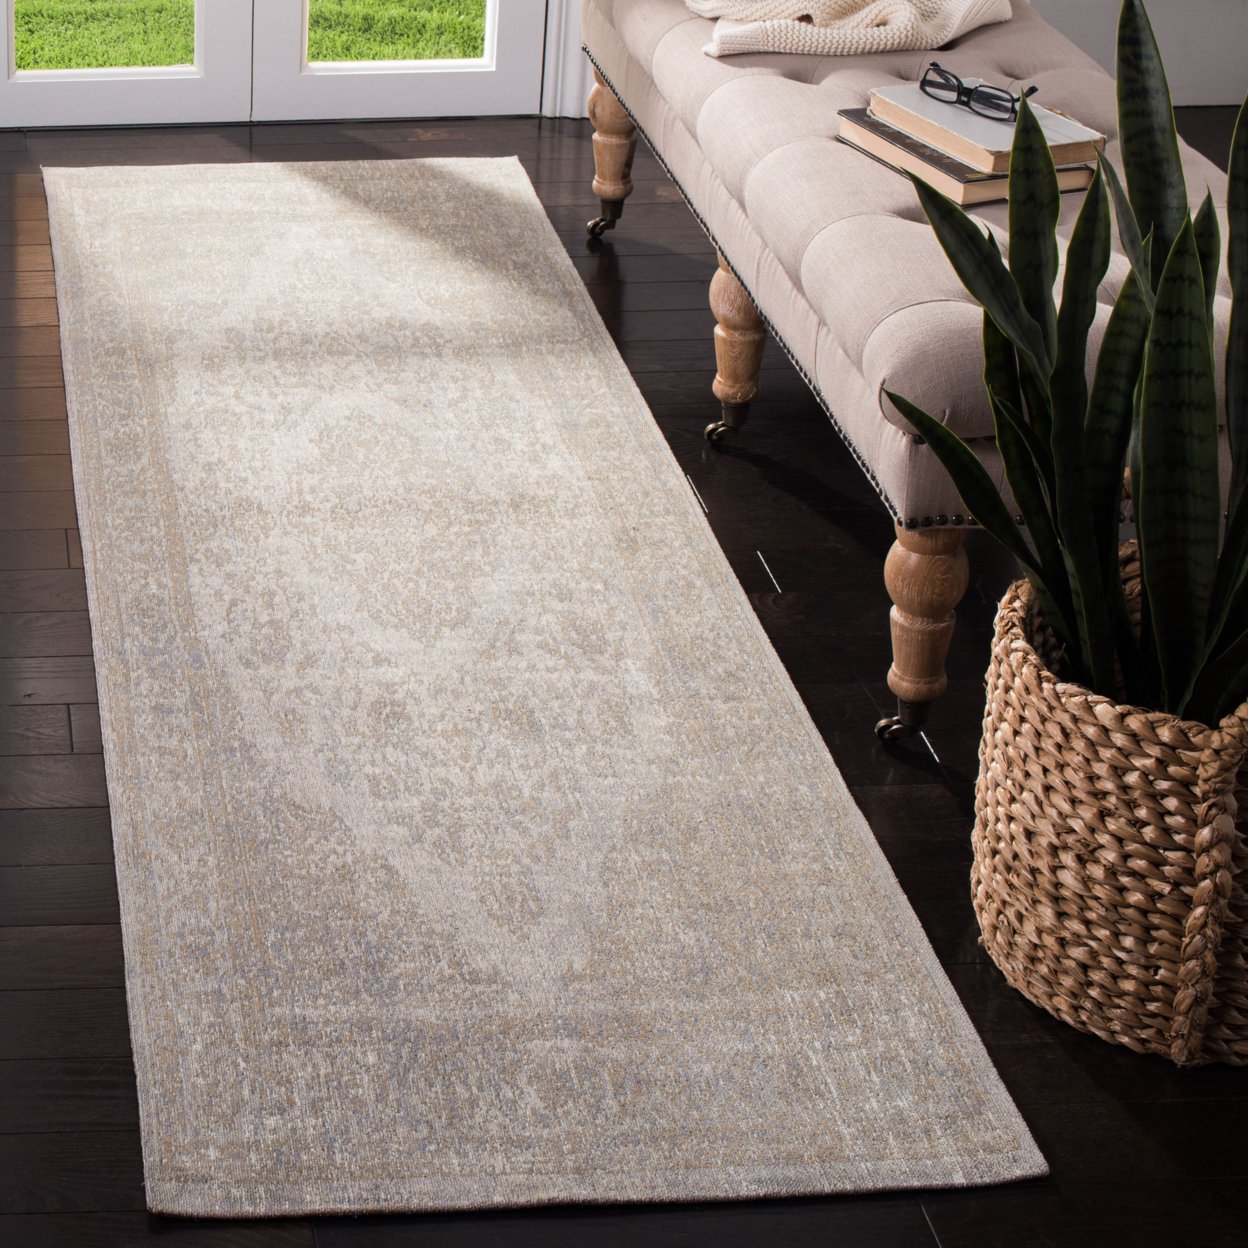 SAFAVIEH Classic Vintage Collection CLV121A Beige Rug - 5' X 8'